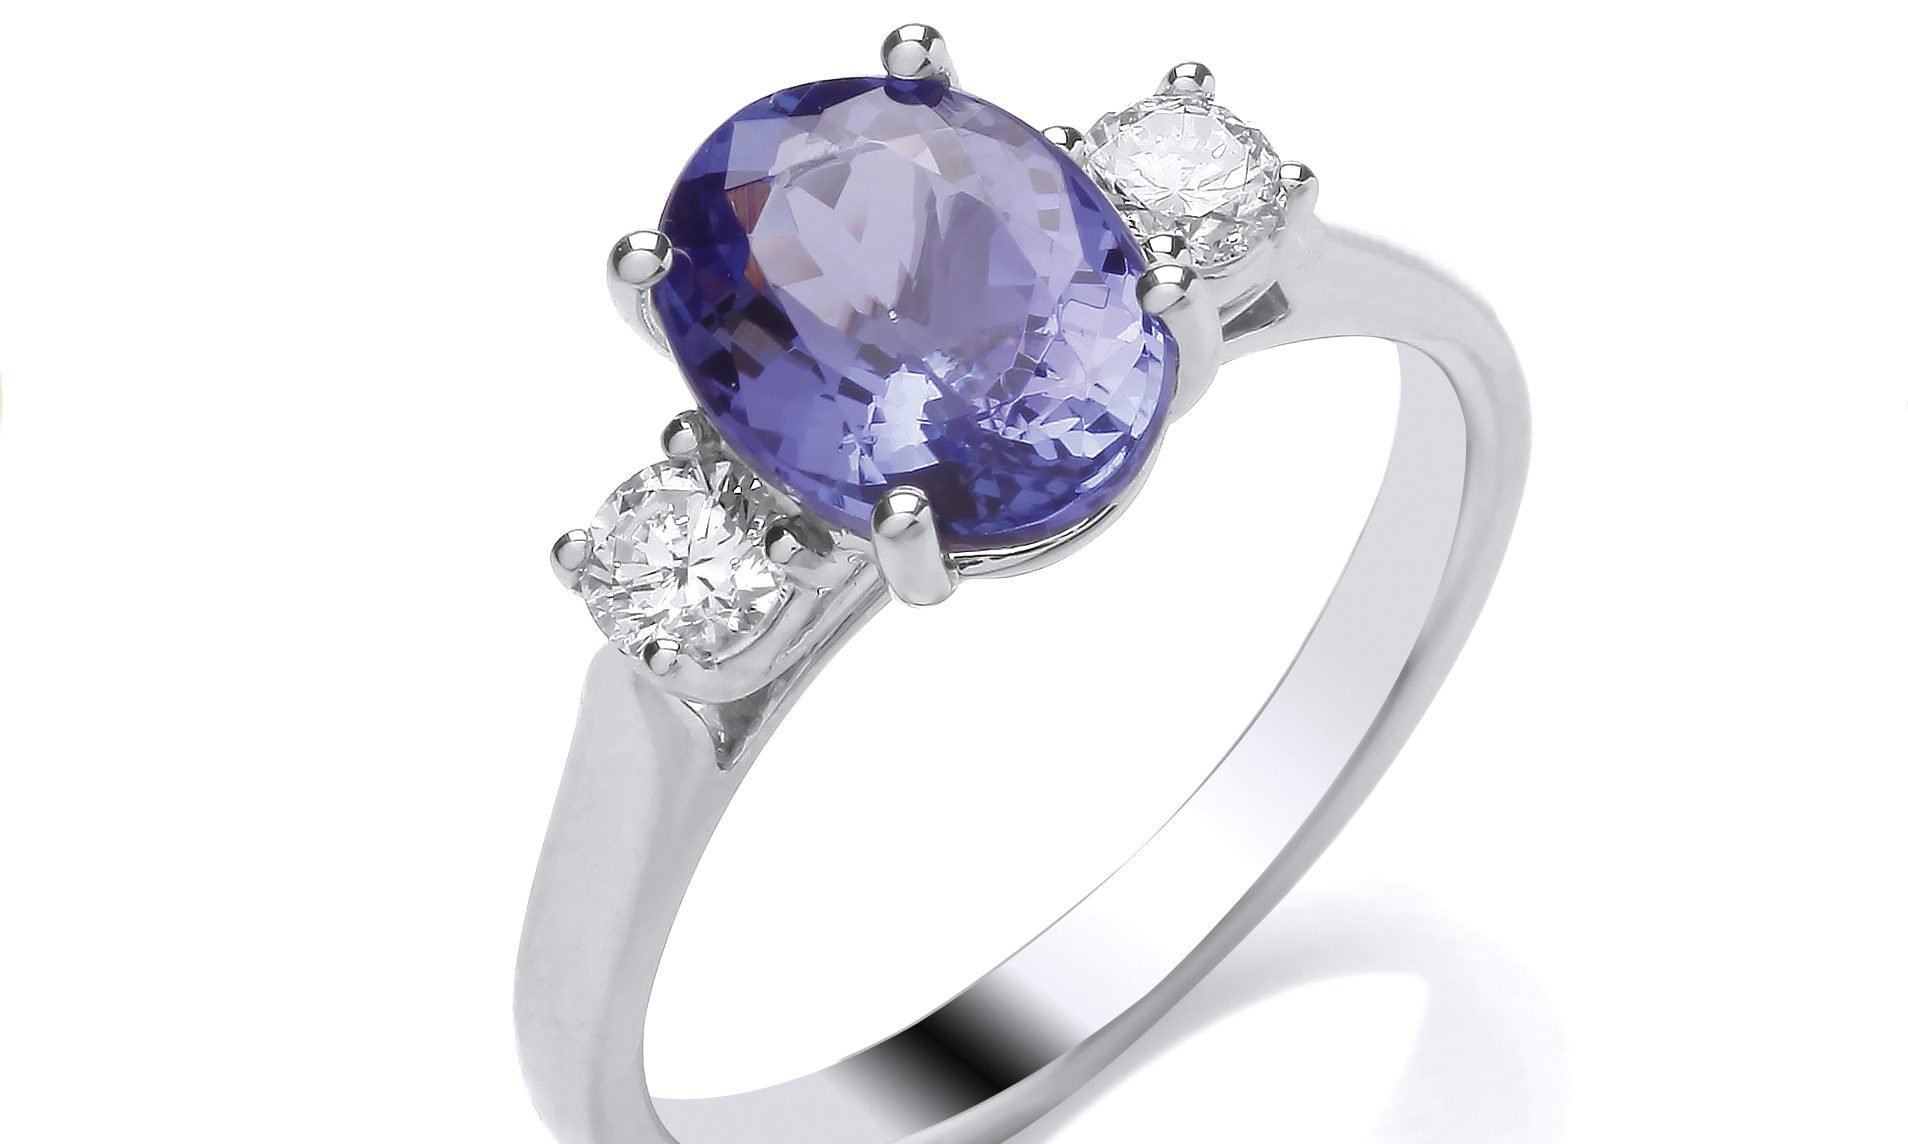 Andre Michael launches new tanzanite collection